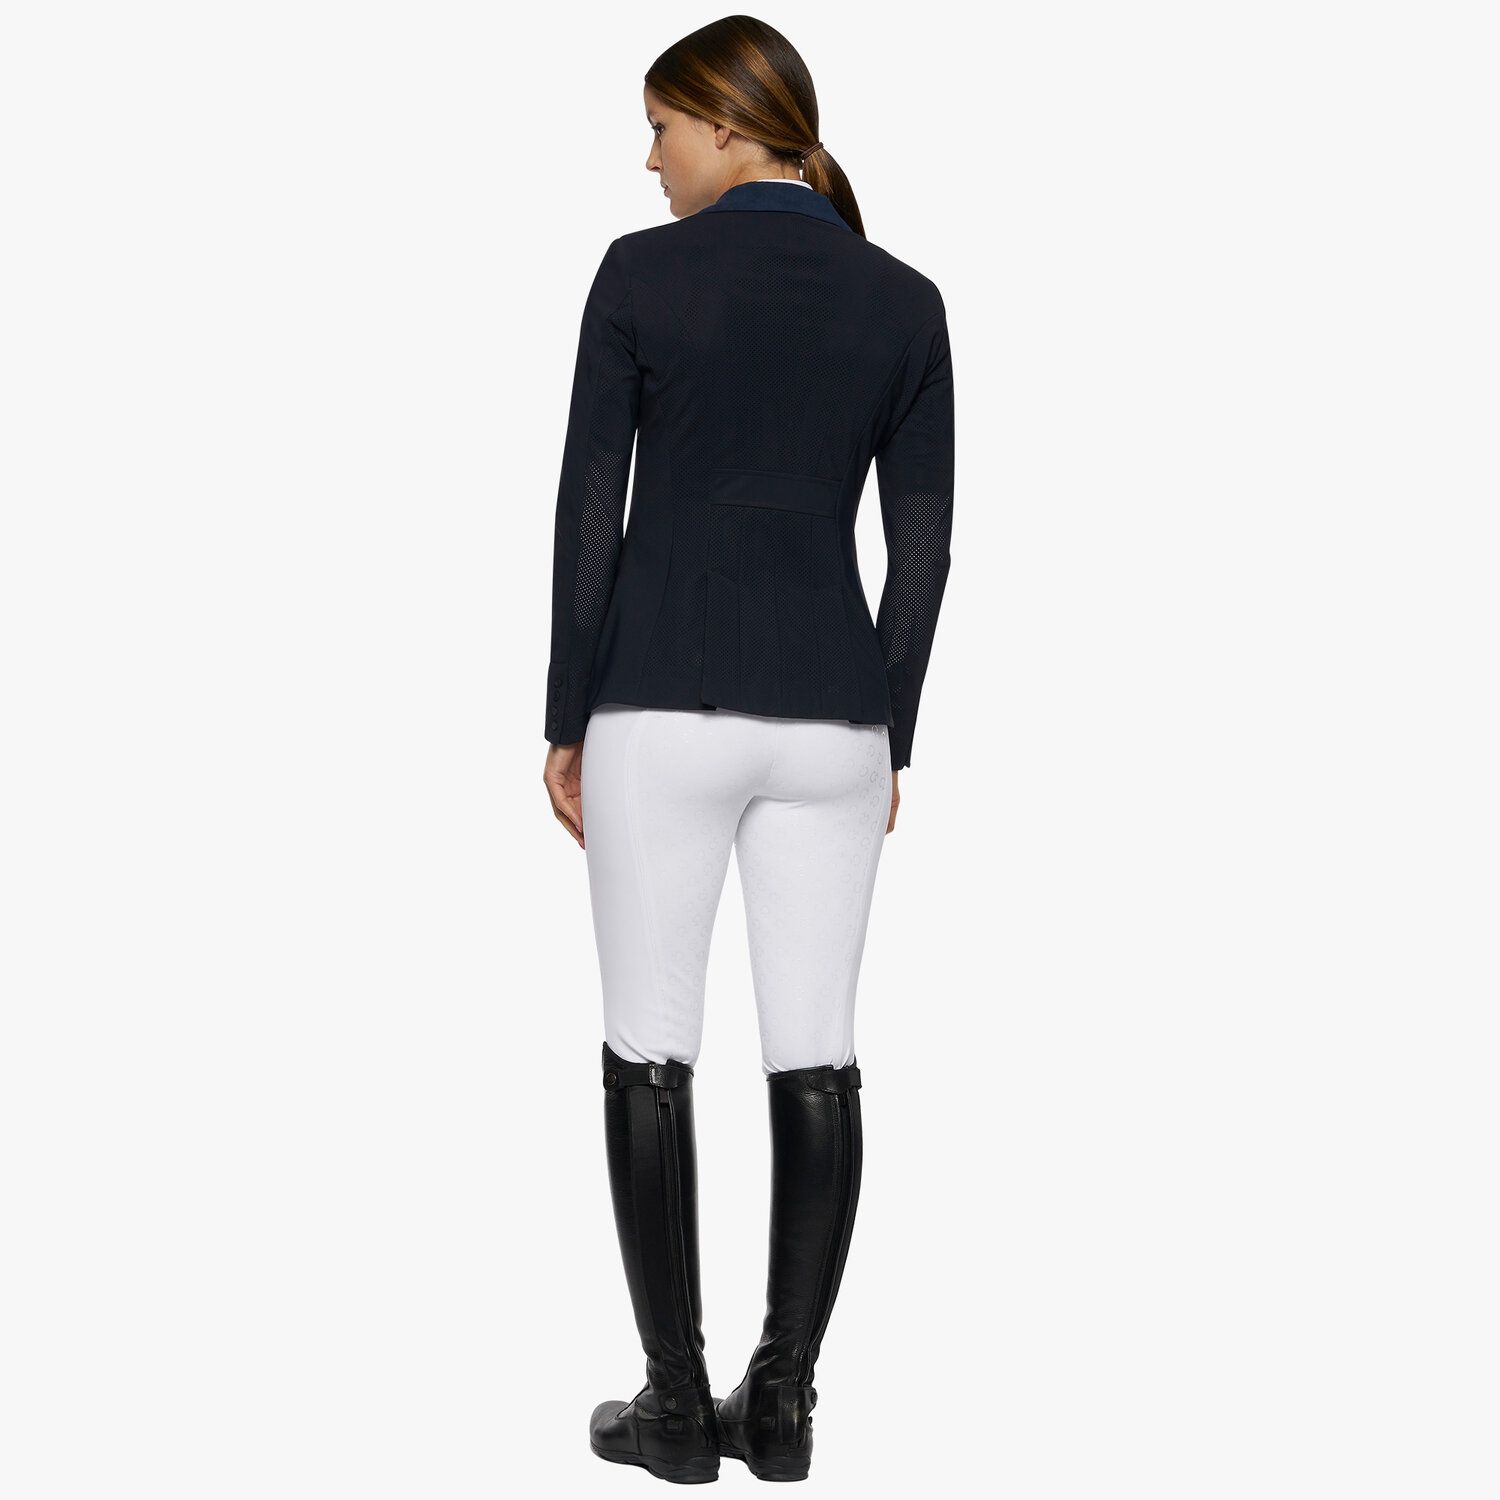 Cavalleria Toscana Women's zip riding jacket with perforated inserts. NAVY-3